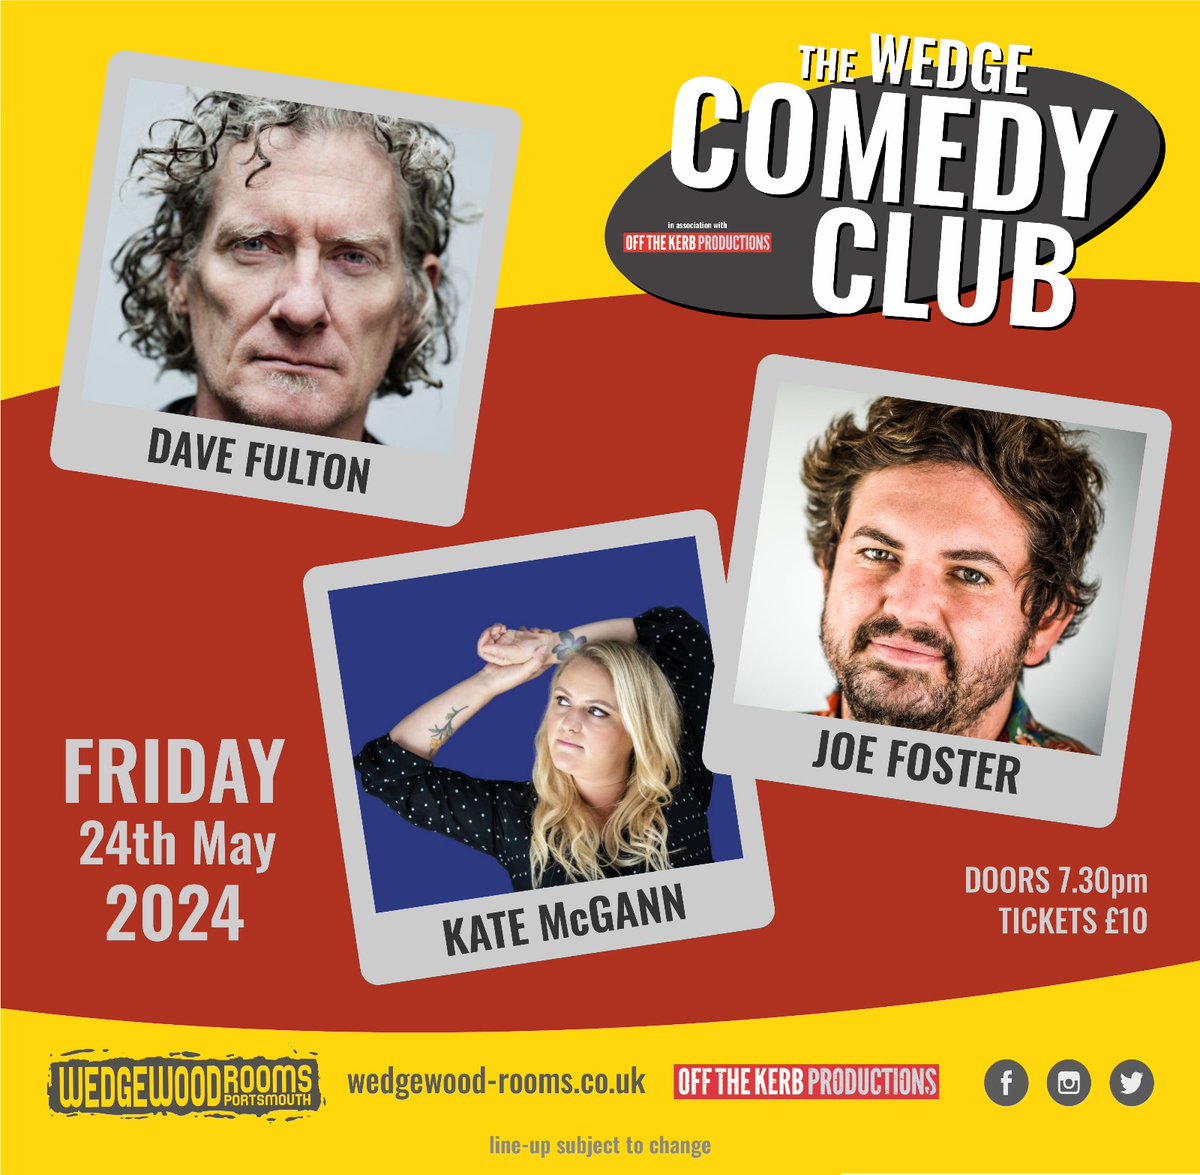 Our fortnightly Comedy Club is back this Friday! Joining us we have @fulton_dave, Kate McGann and Joe Foster😂 Doors 7:30pm, food served til 8:15pm 👉 wedgewood-rooms.co.uk 👈